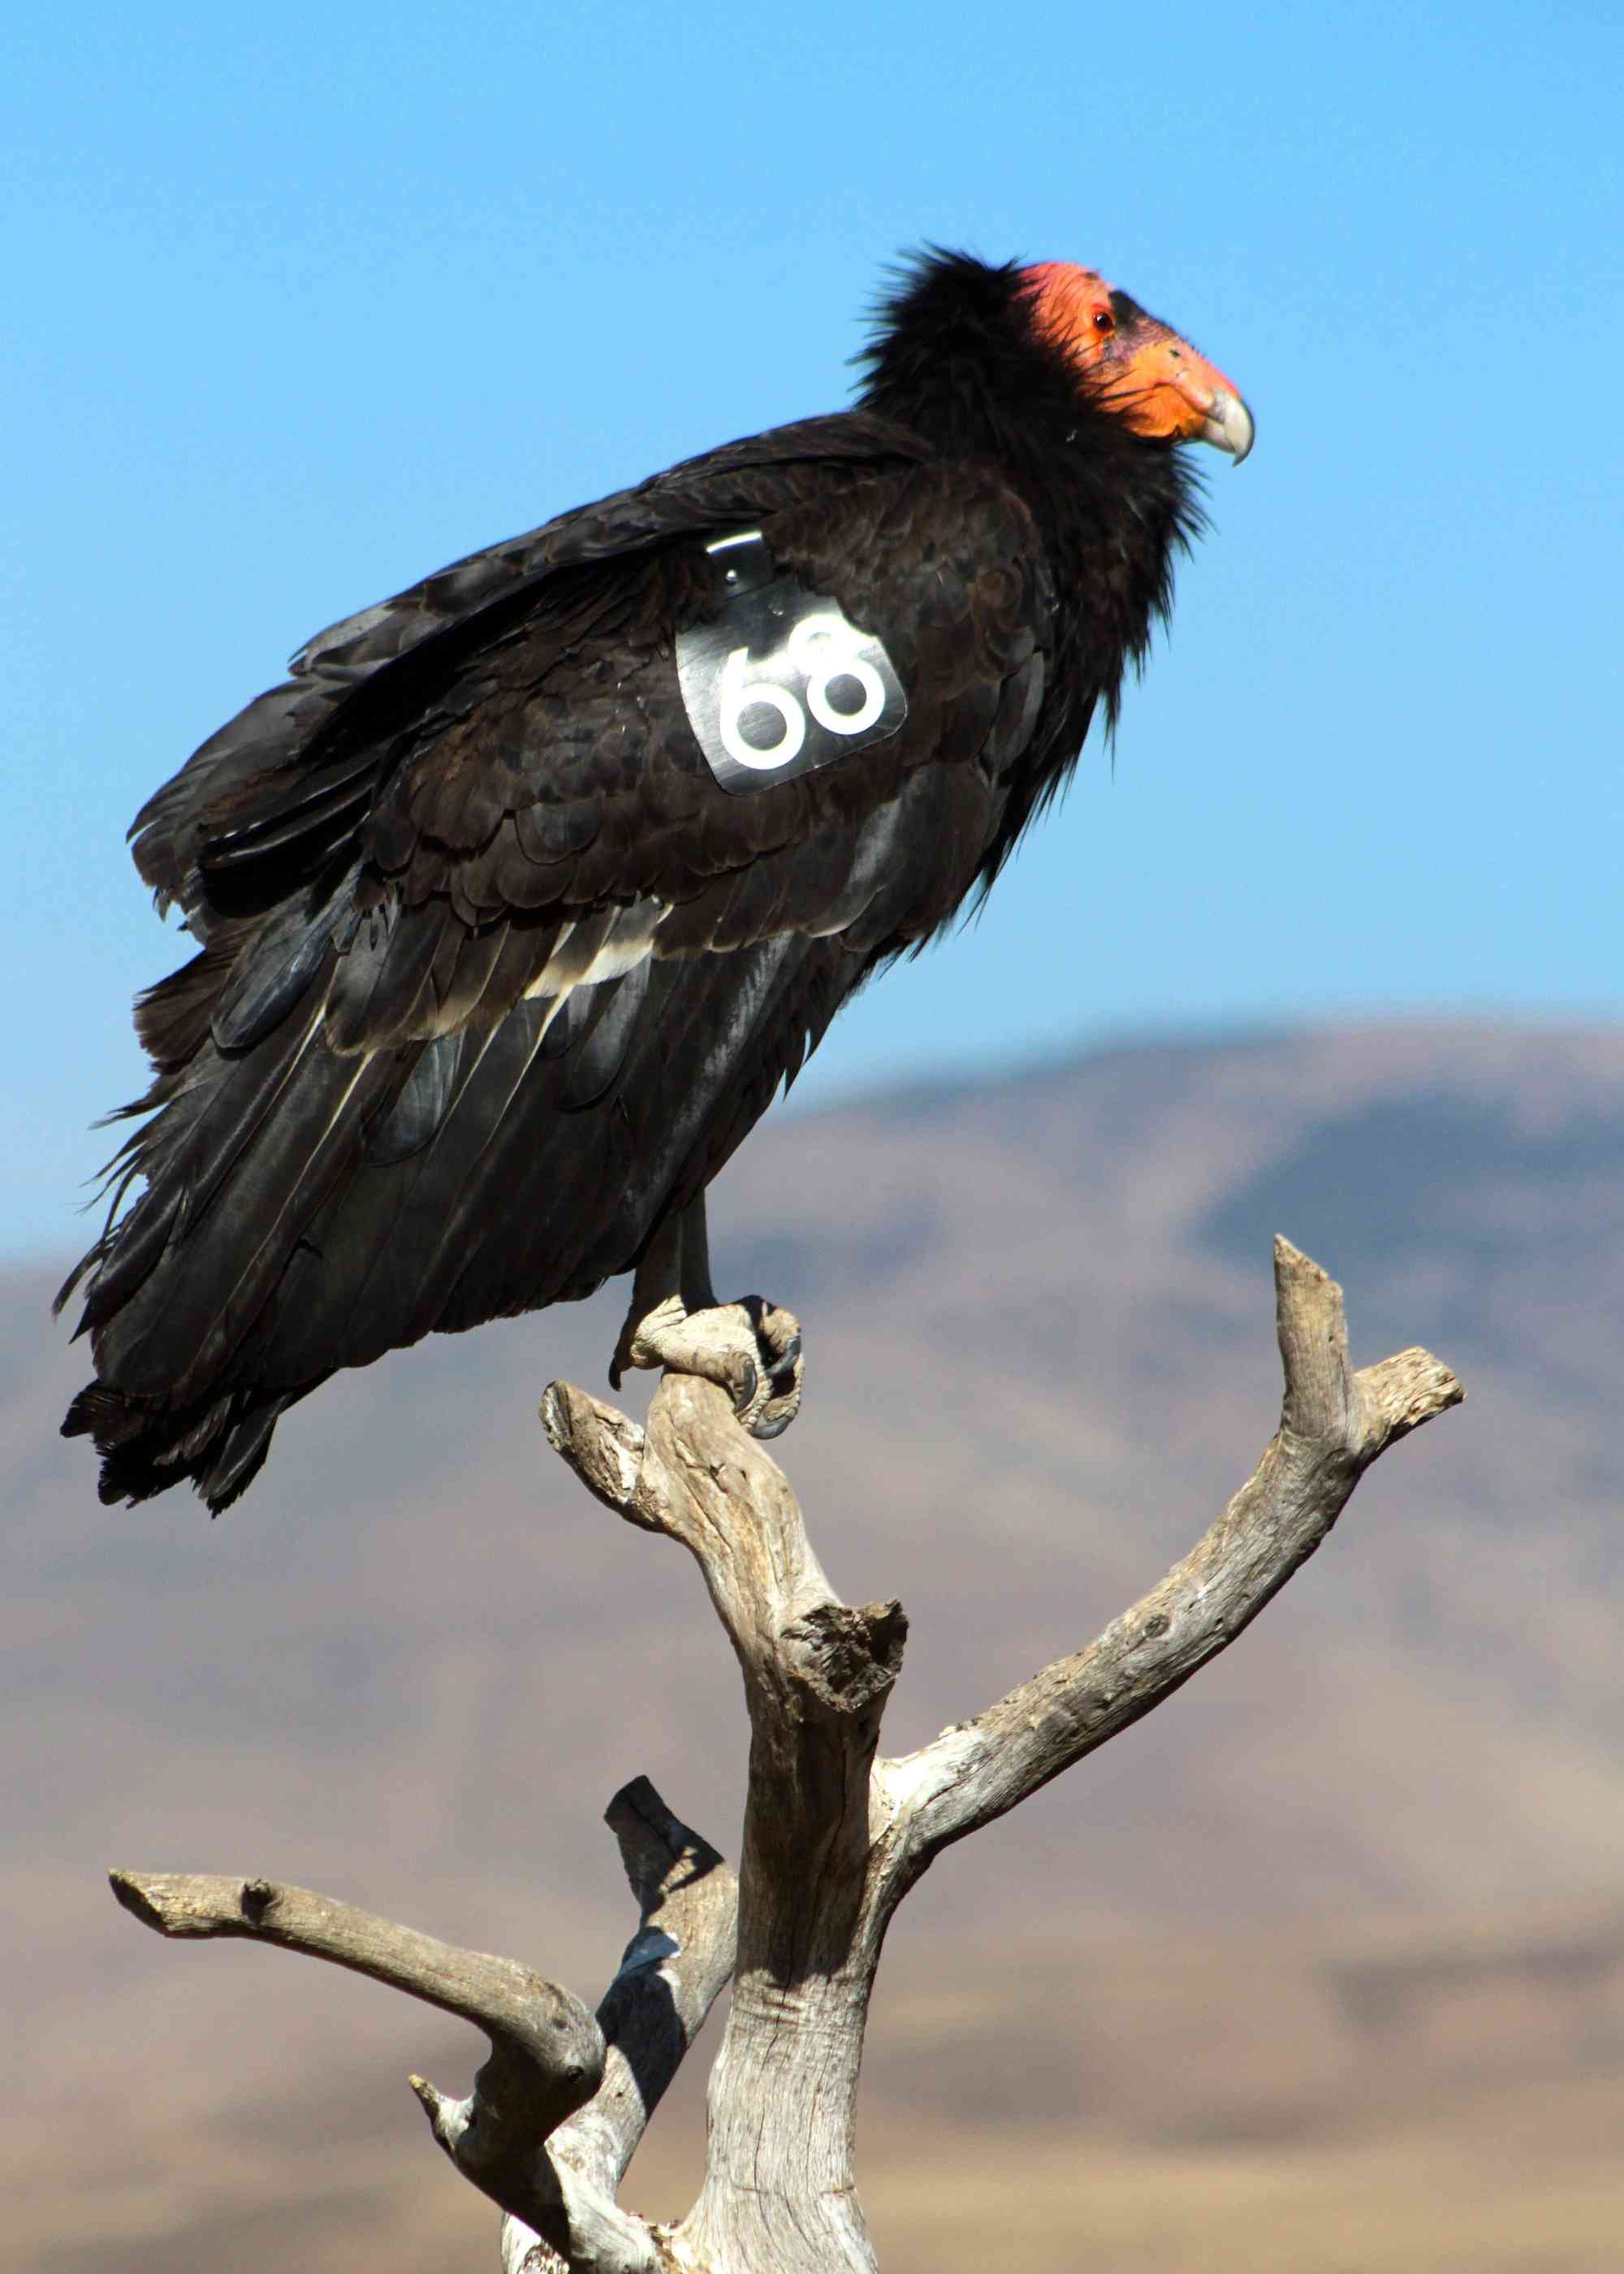 California condor #568 perched atop a tree branch at Bitter Creek National Wildlife Refuge